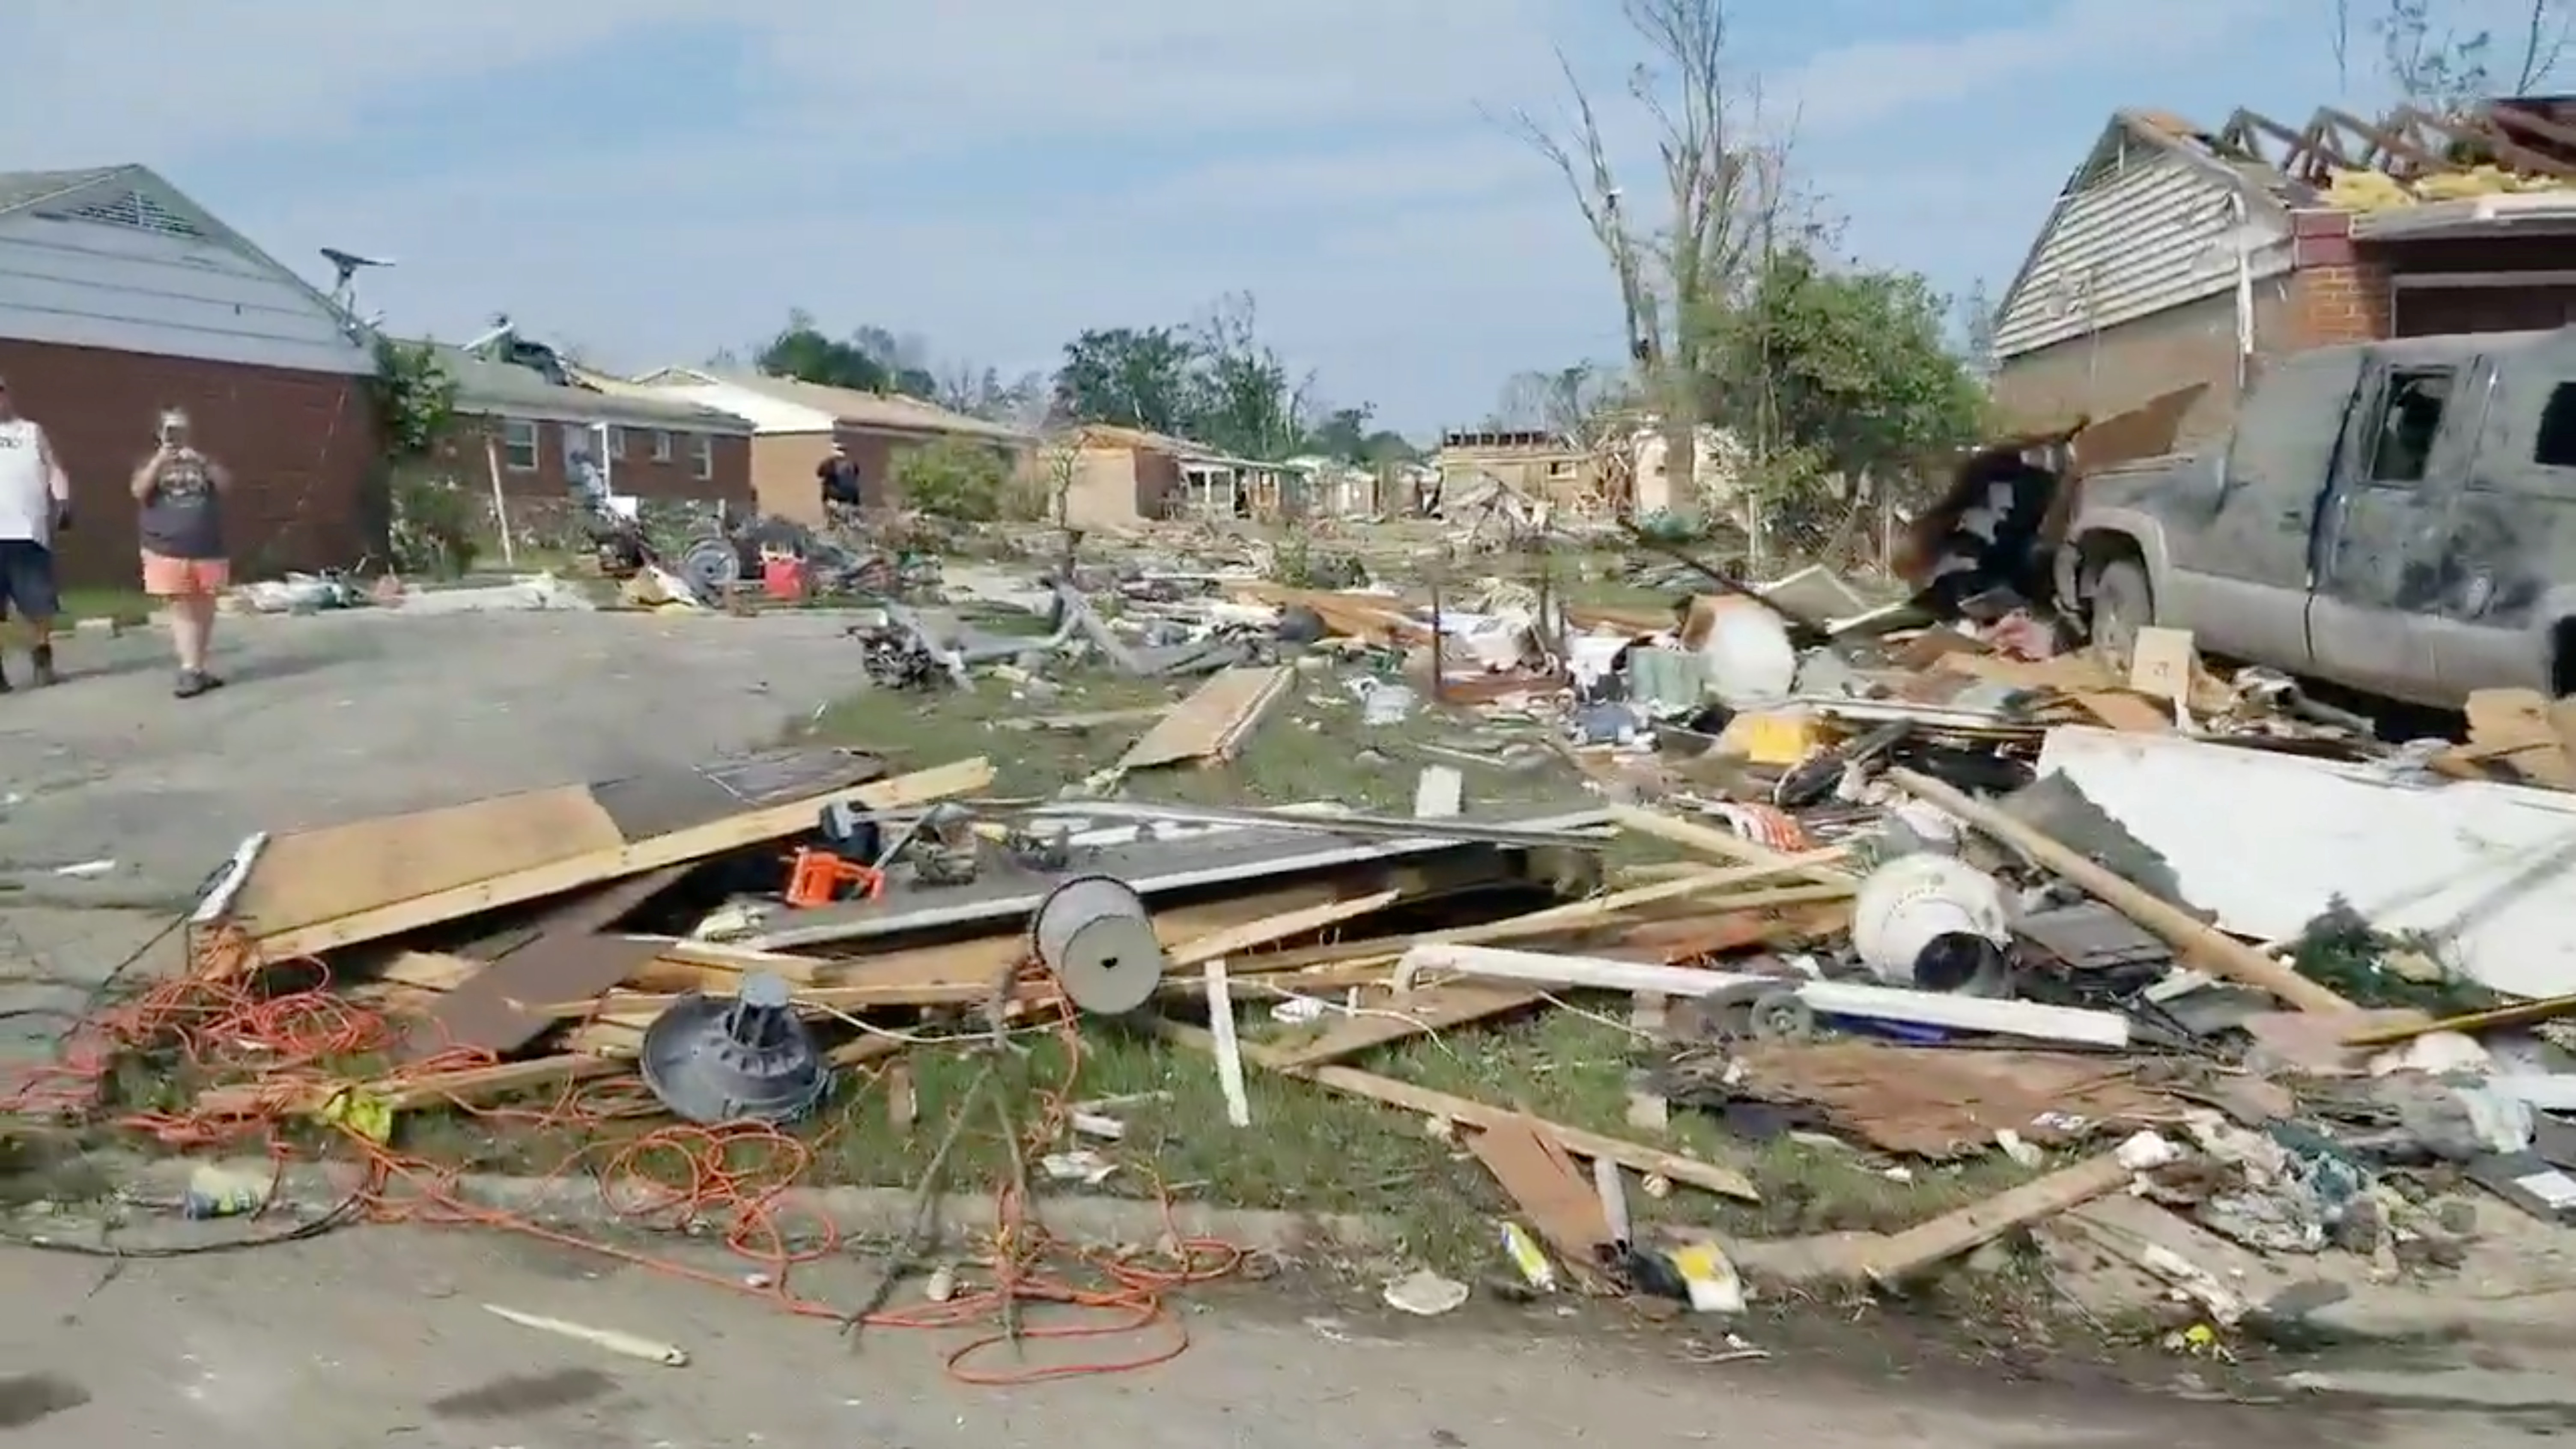 A debris is seen after a tornado touched down, in Brookville